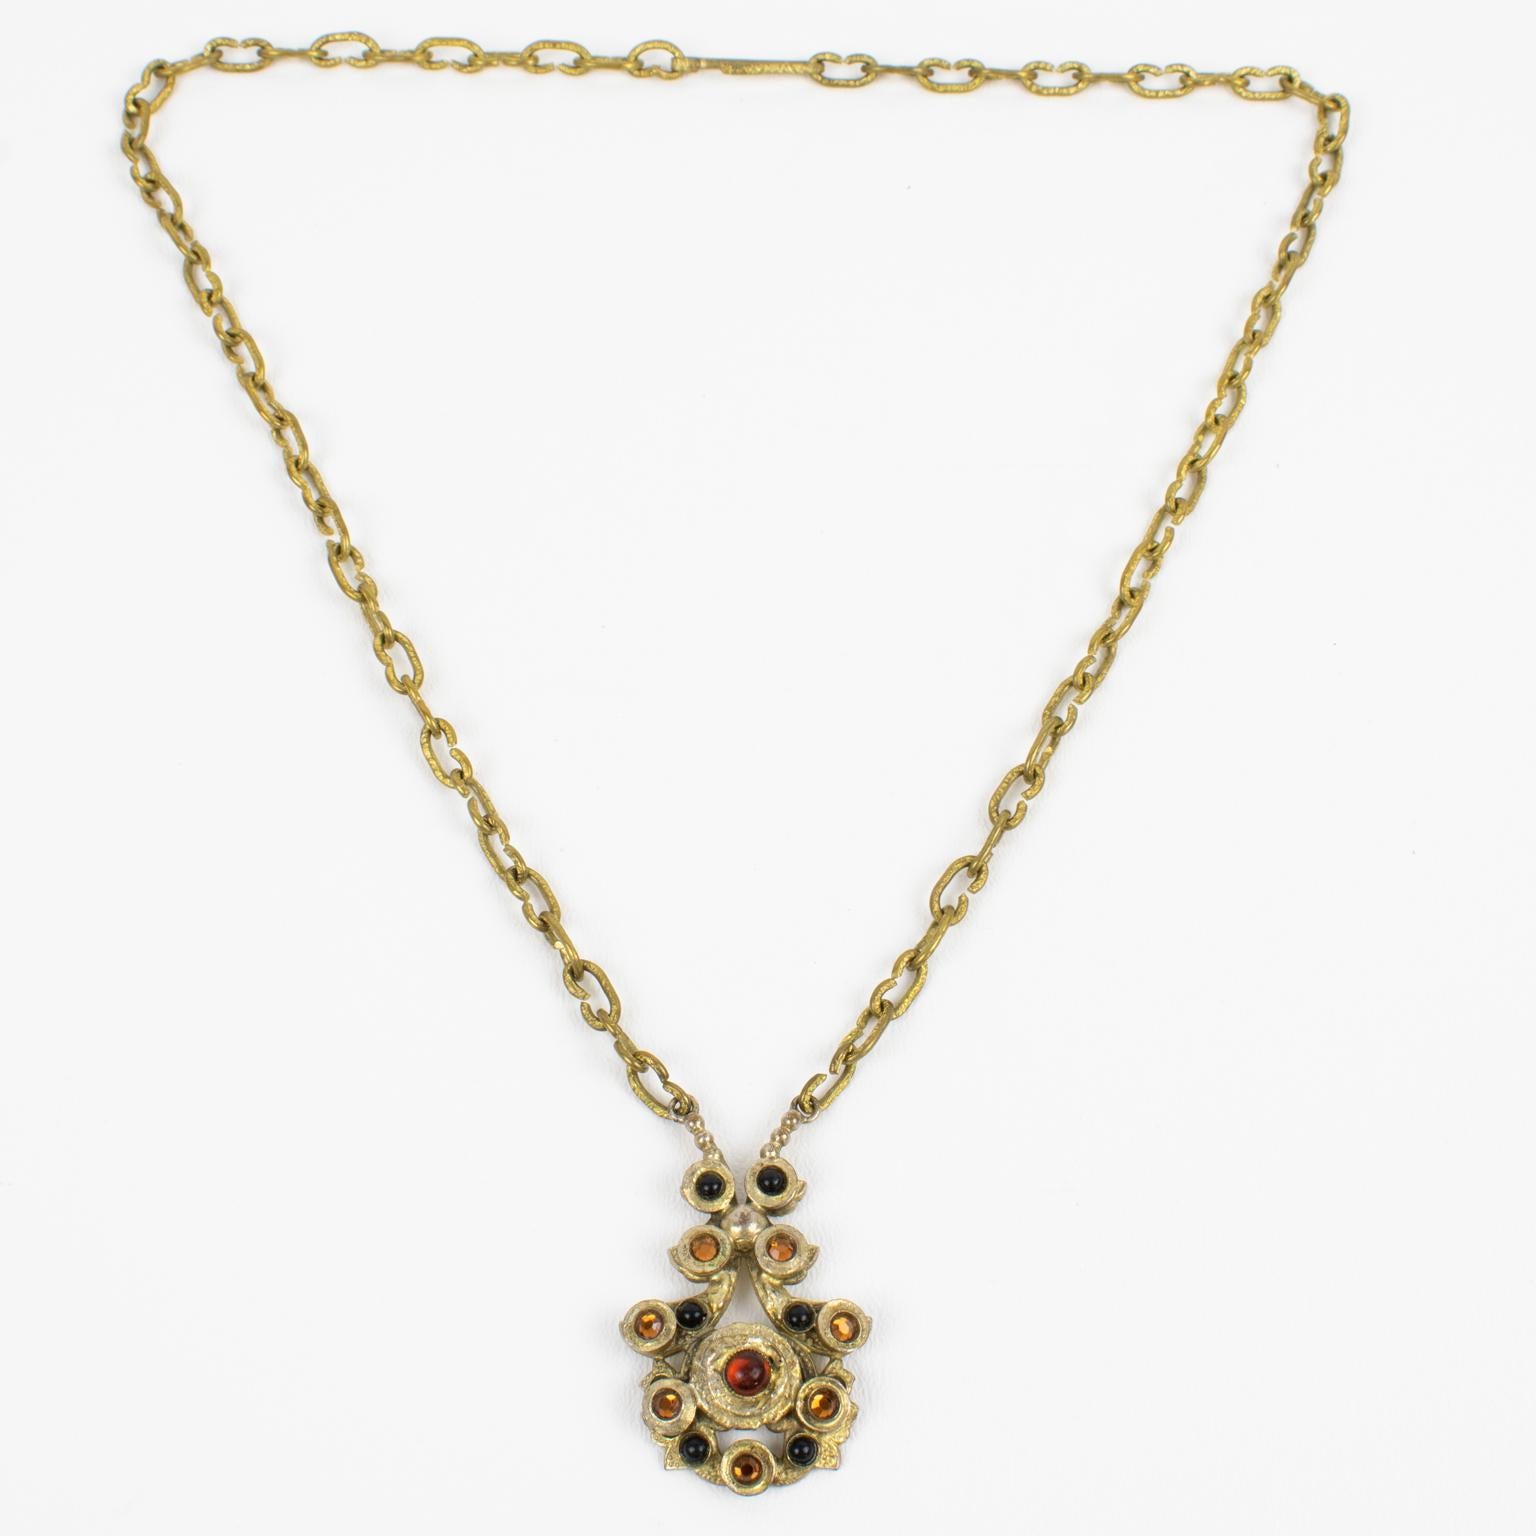 Henry Perichon (aka Henry) designed this elegant Medieval revival gilded bronze pendant necklace in the 1950s. The bronze metal pendant has an antique Middle-Age design influence and is ornate with black and paprika red poured glass cabochons and